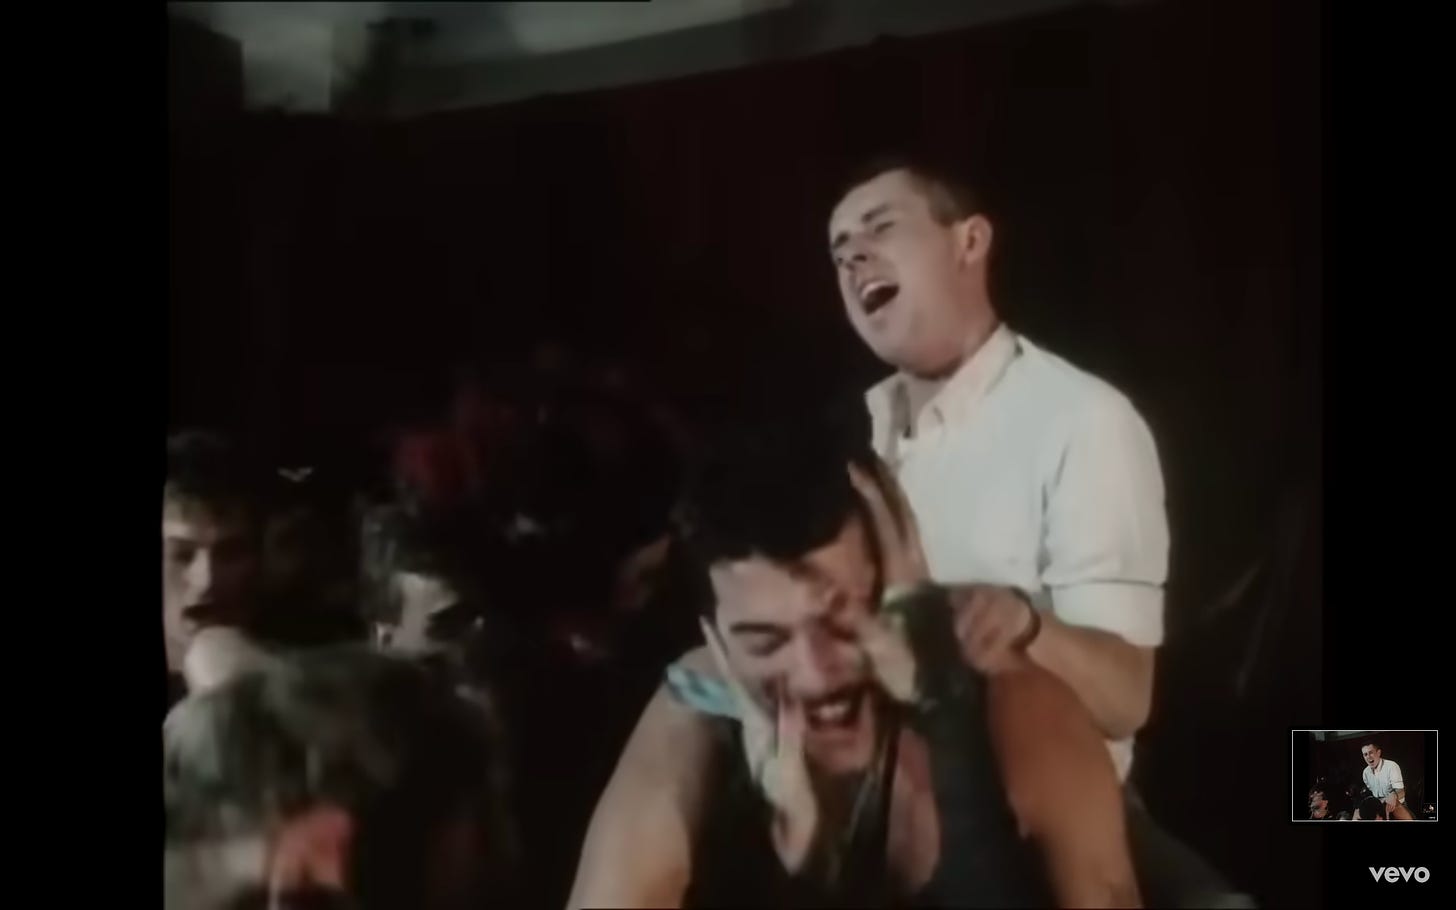 Holly Johnson and Paul Rutherford featured in "Relax" music video